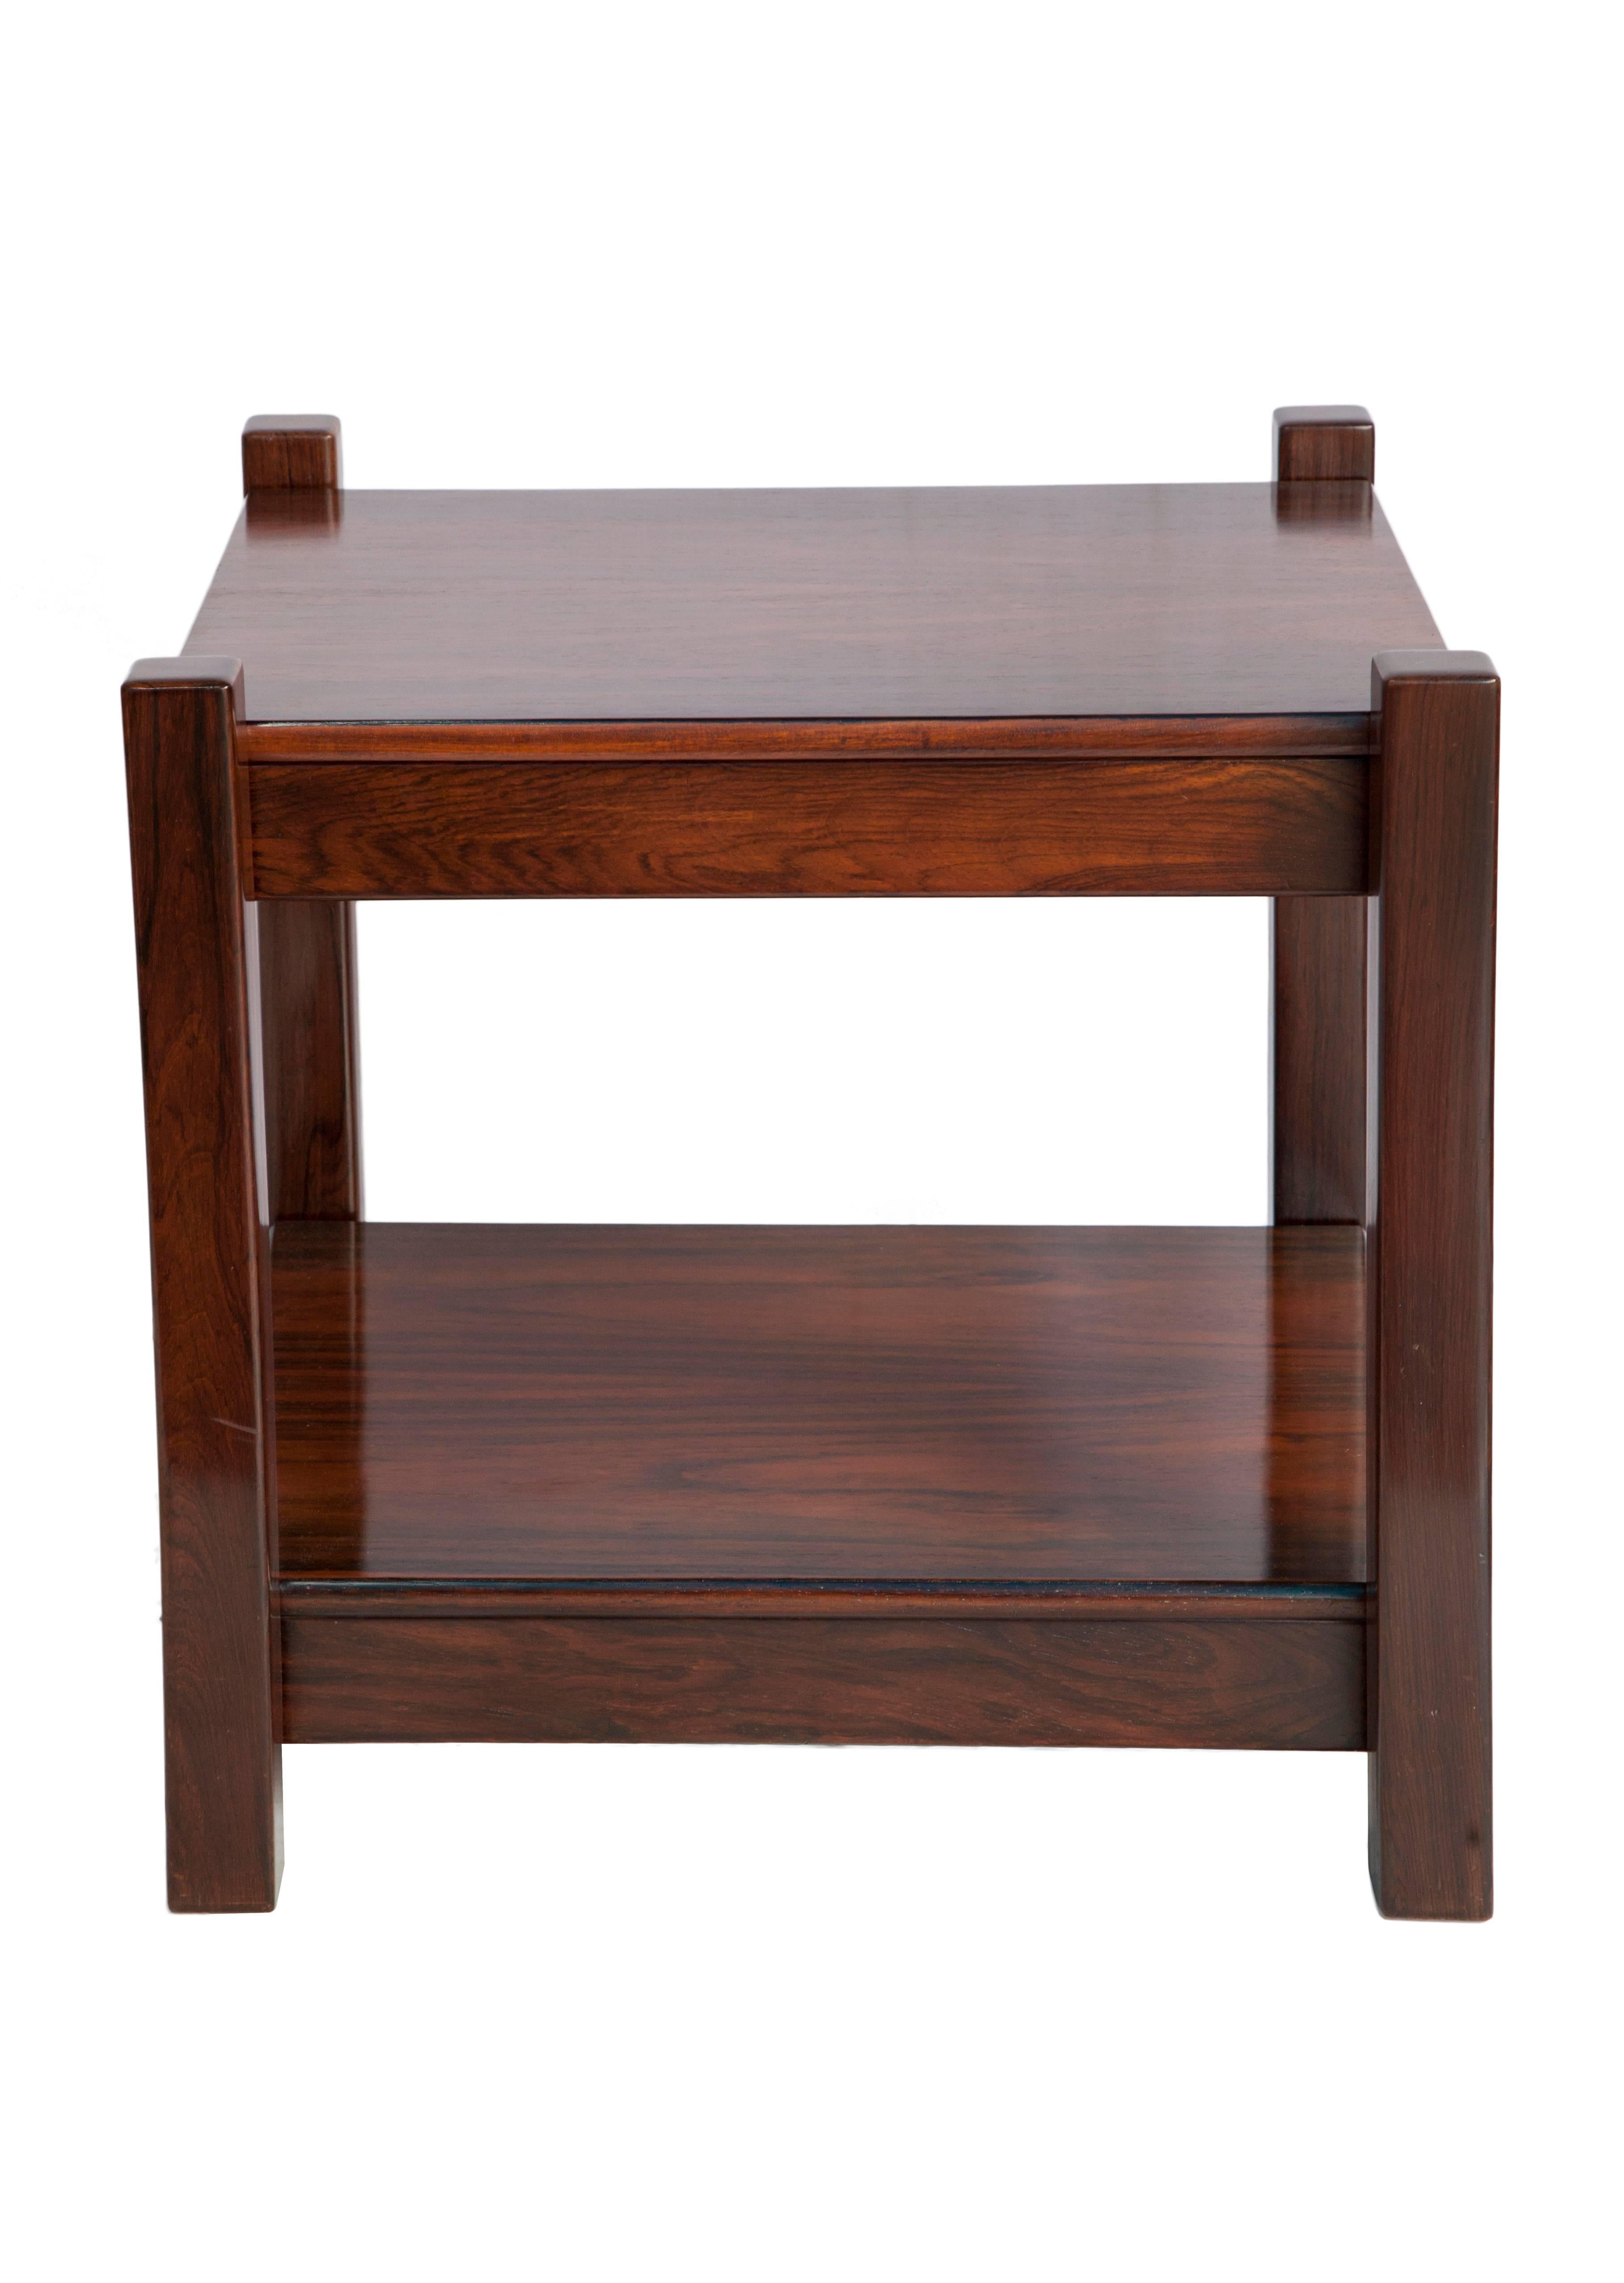 A Mid-Century Modern side table crafted in Brazilian Jacaranda wood, made in Brazil, circa 1960. In good vintage condition, with wear consistent to age and use.